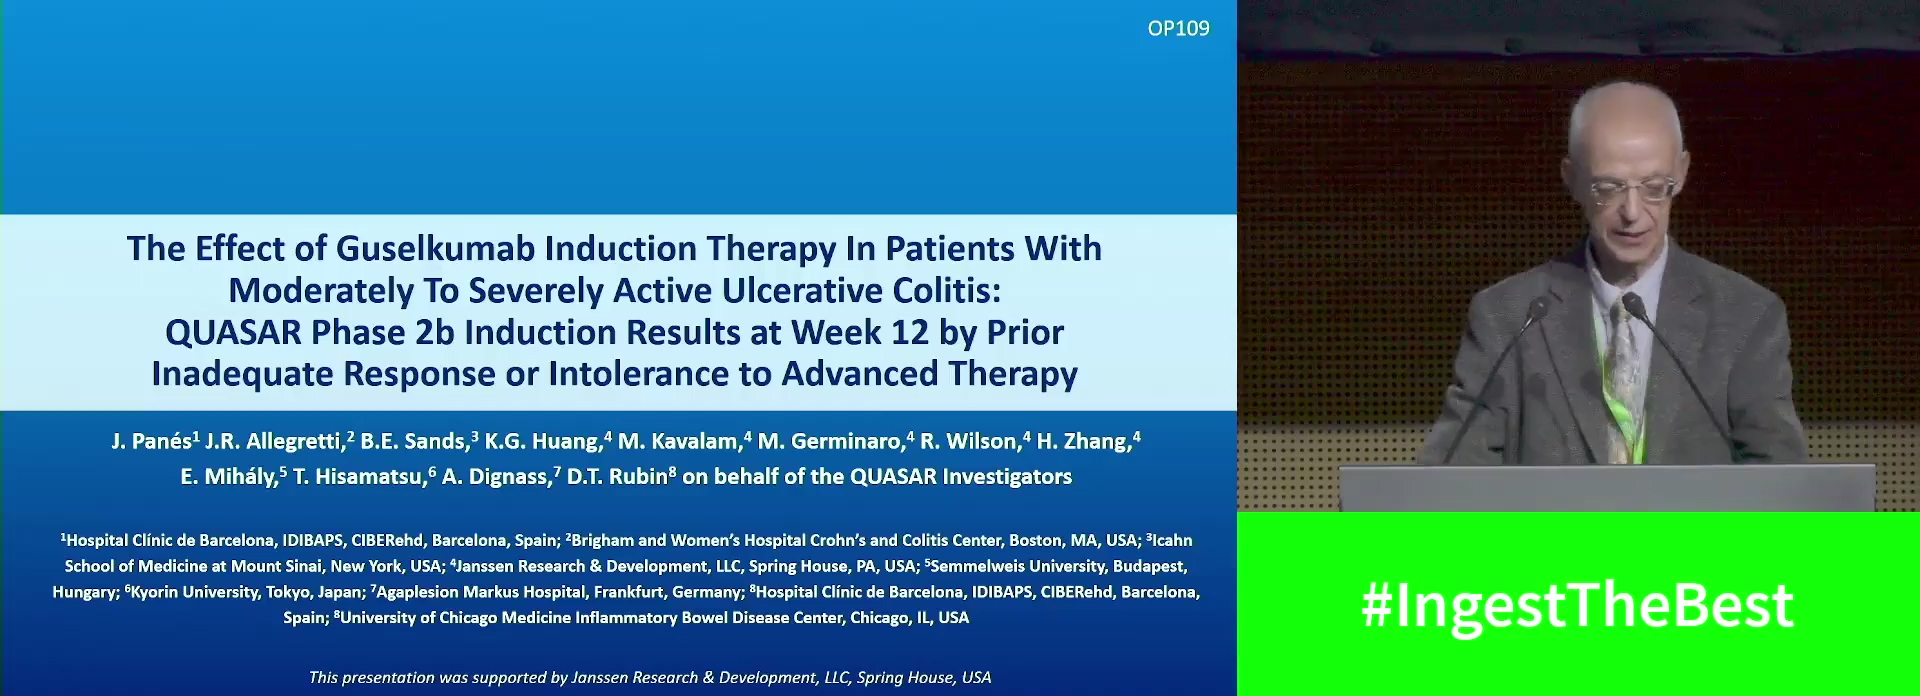 THE EFFECT OF GUSELKUMAB INDUCTION THERAPY IN PATIENTS WITH MODERATELY TO SEVERELY ACTIVE ULCERATIVE COLITIS: QUASAR PHASE 2B INDUCTION RESULTS AT WEEK 12 BY PRIOR INADEQUATE RESPONSE OR INTOLERANCE TO ADVANCED THERAPY